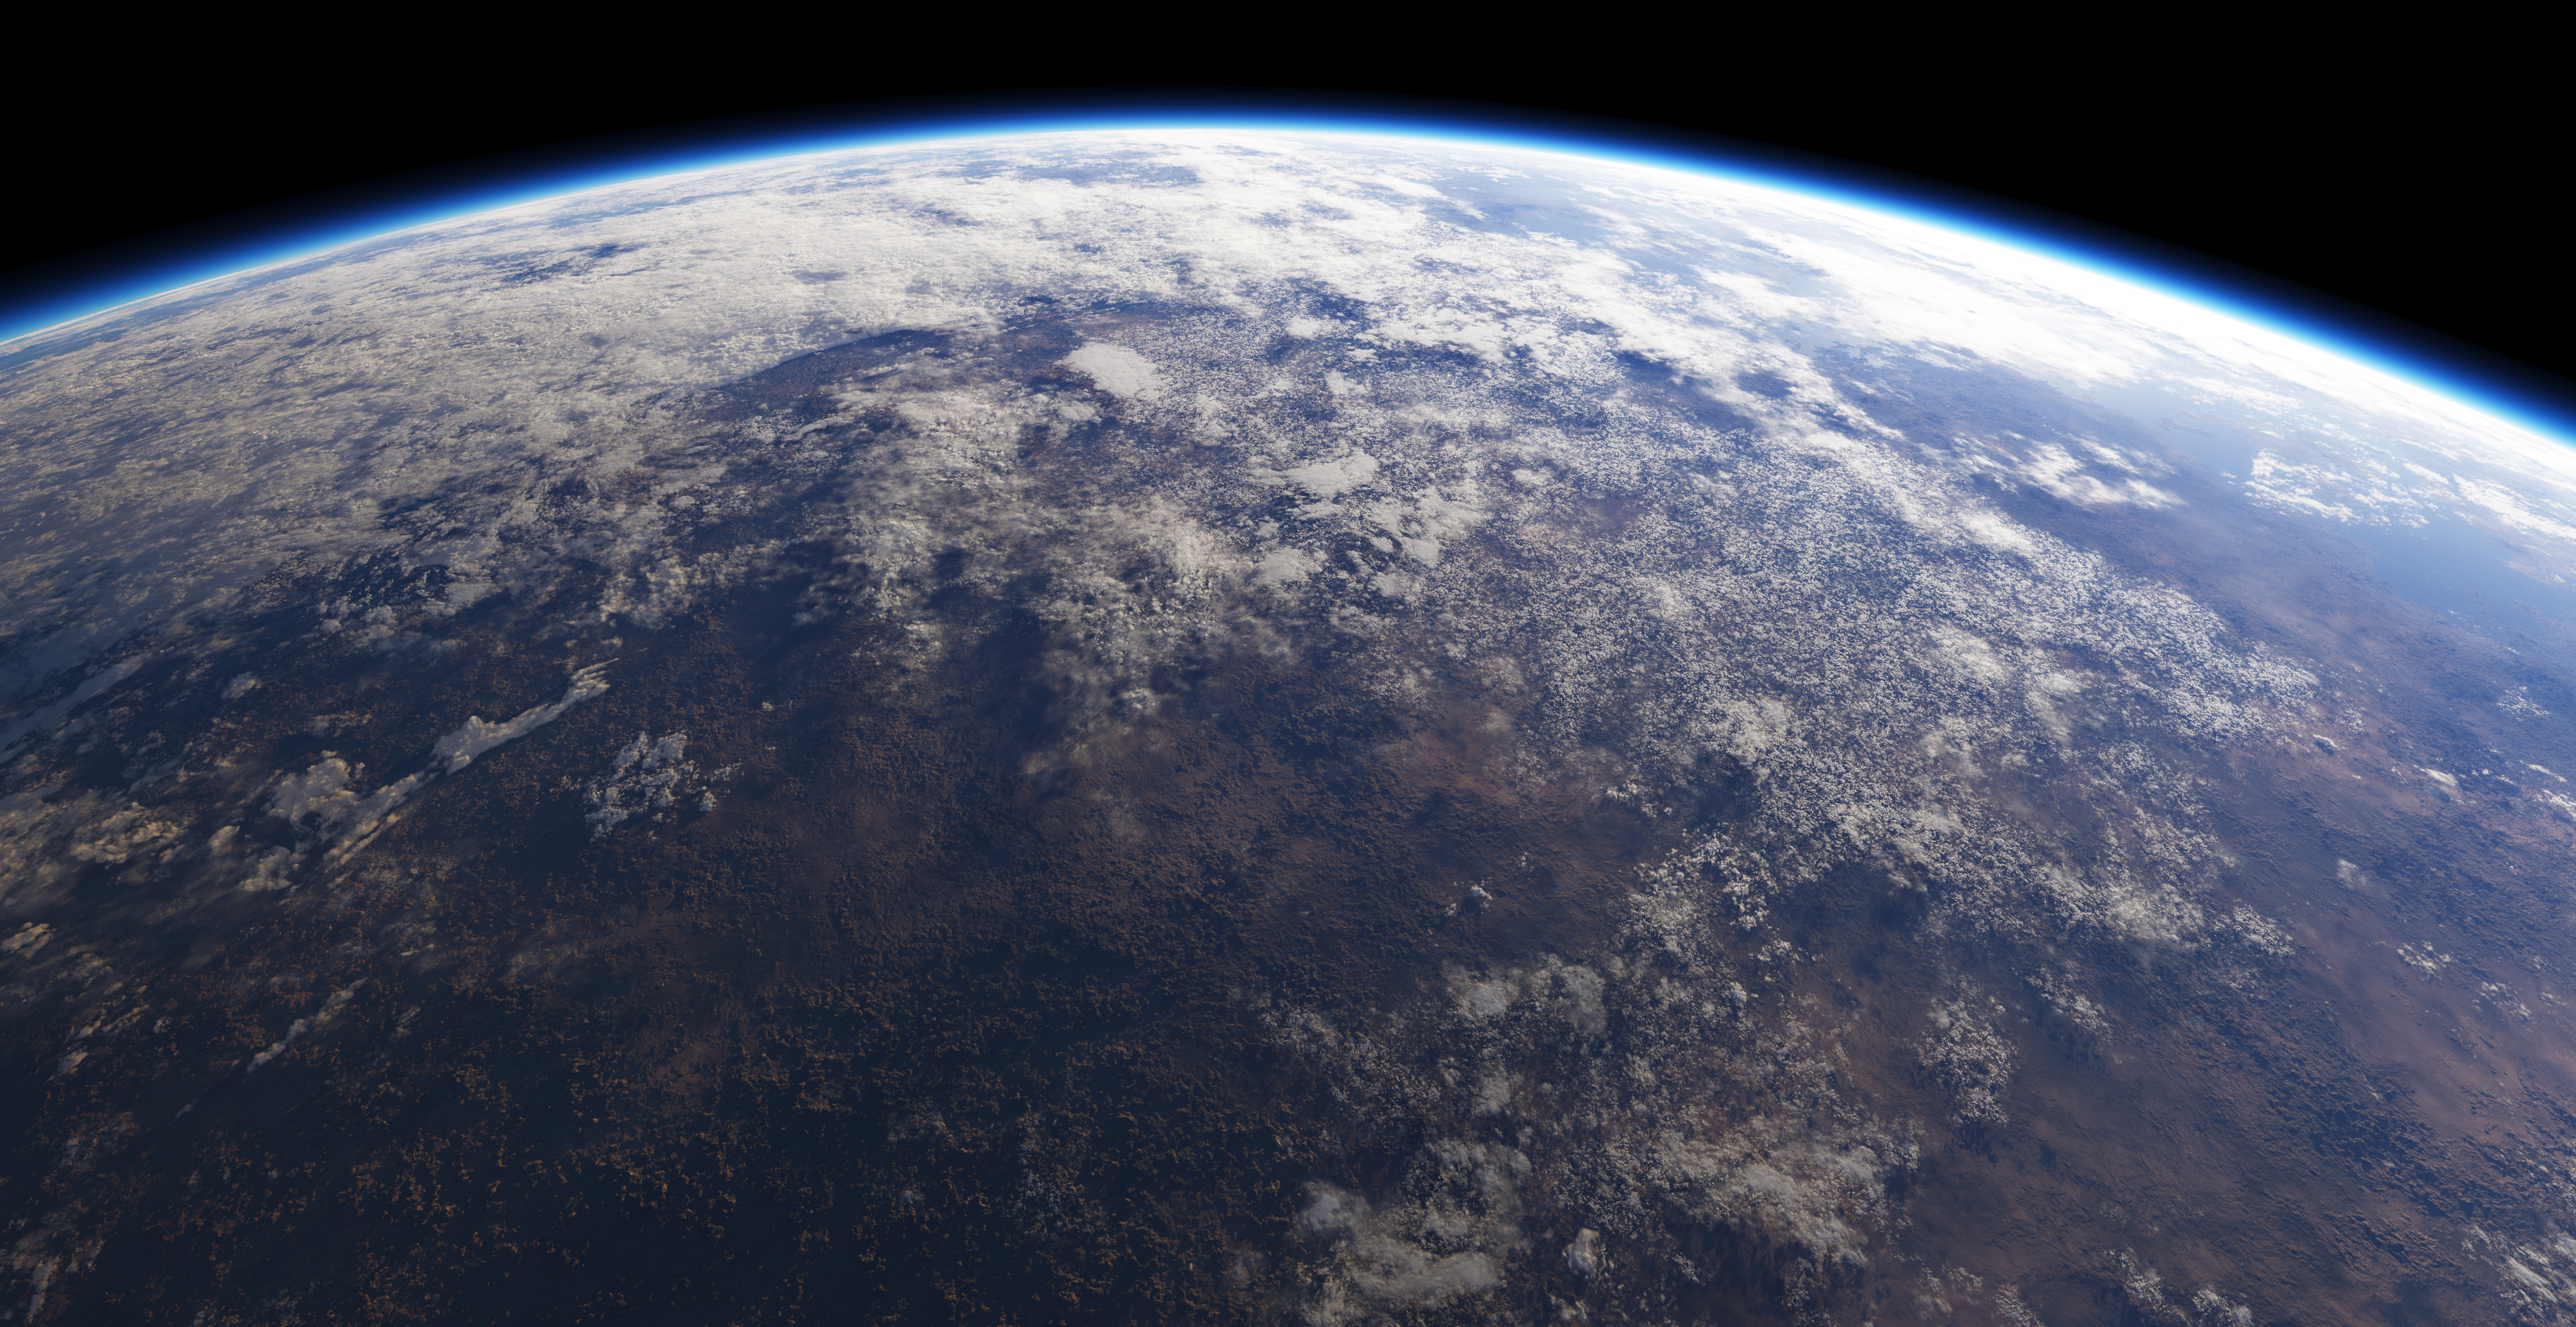 Procedural_Planet_and_Clouds_by_nvseal.jpg